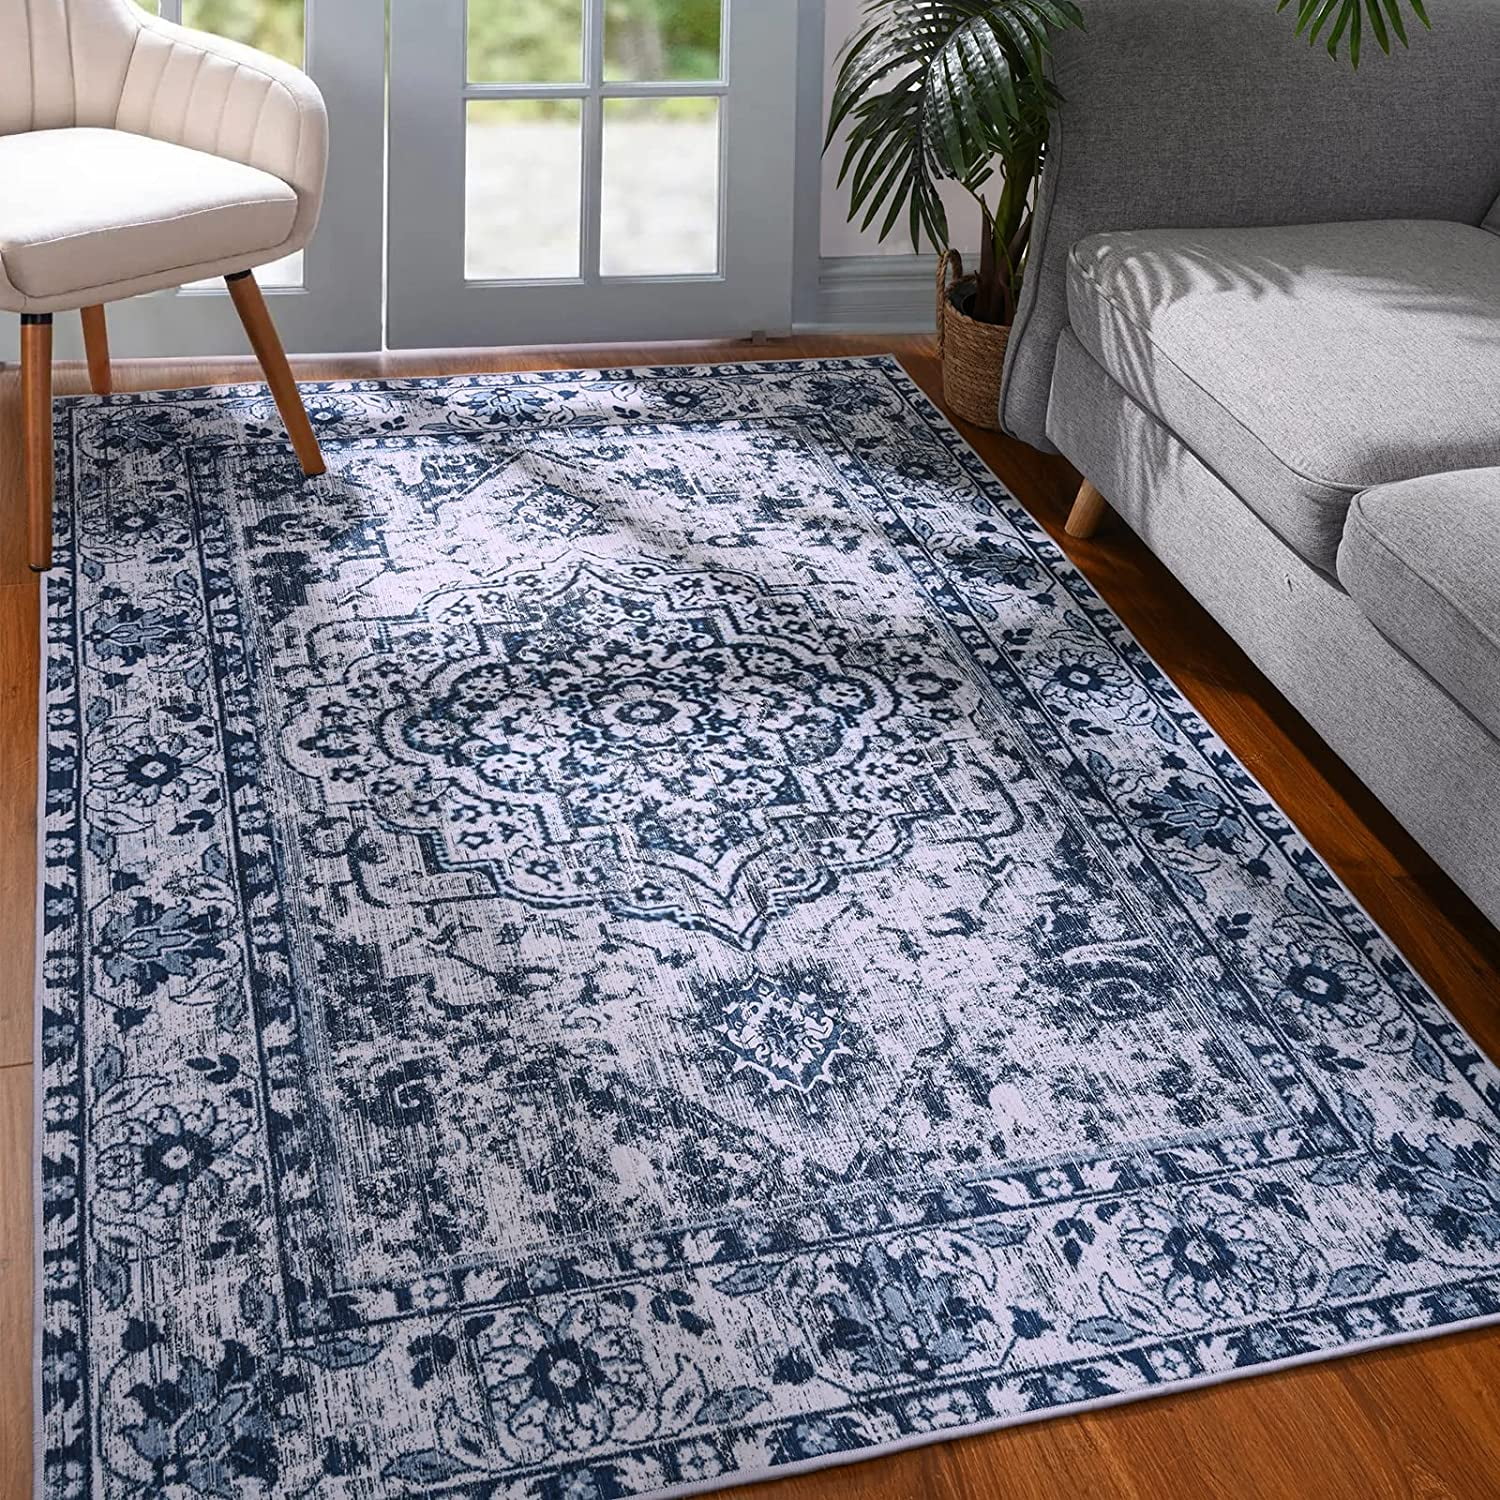 4' x 6' Grey Charcoal Gold Brown Ivory Pale Sage and Light Blue Oriental Printed Stain Resistant Non Skid Area Rug